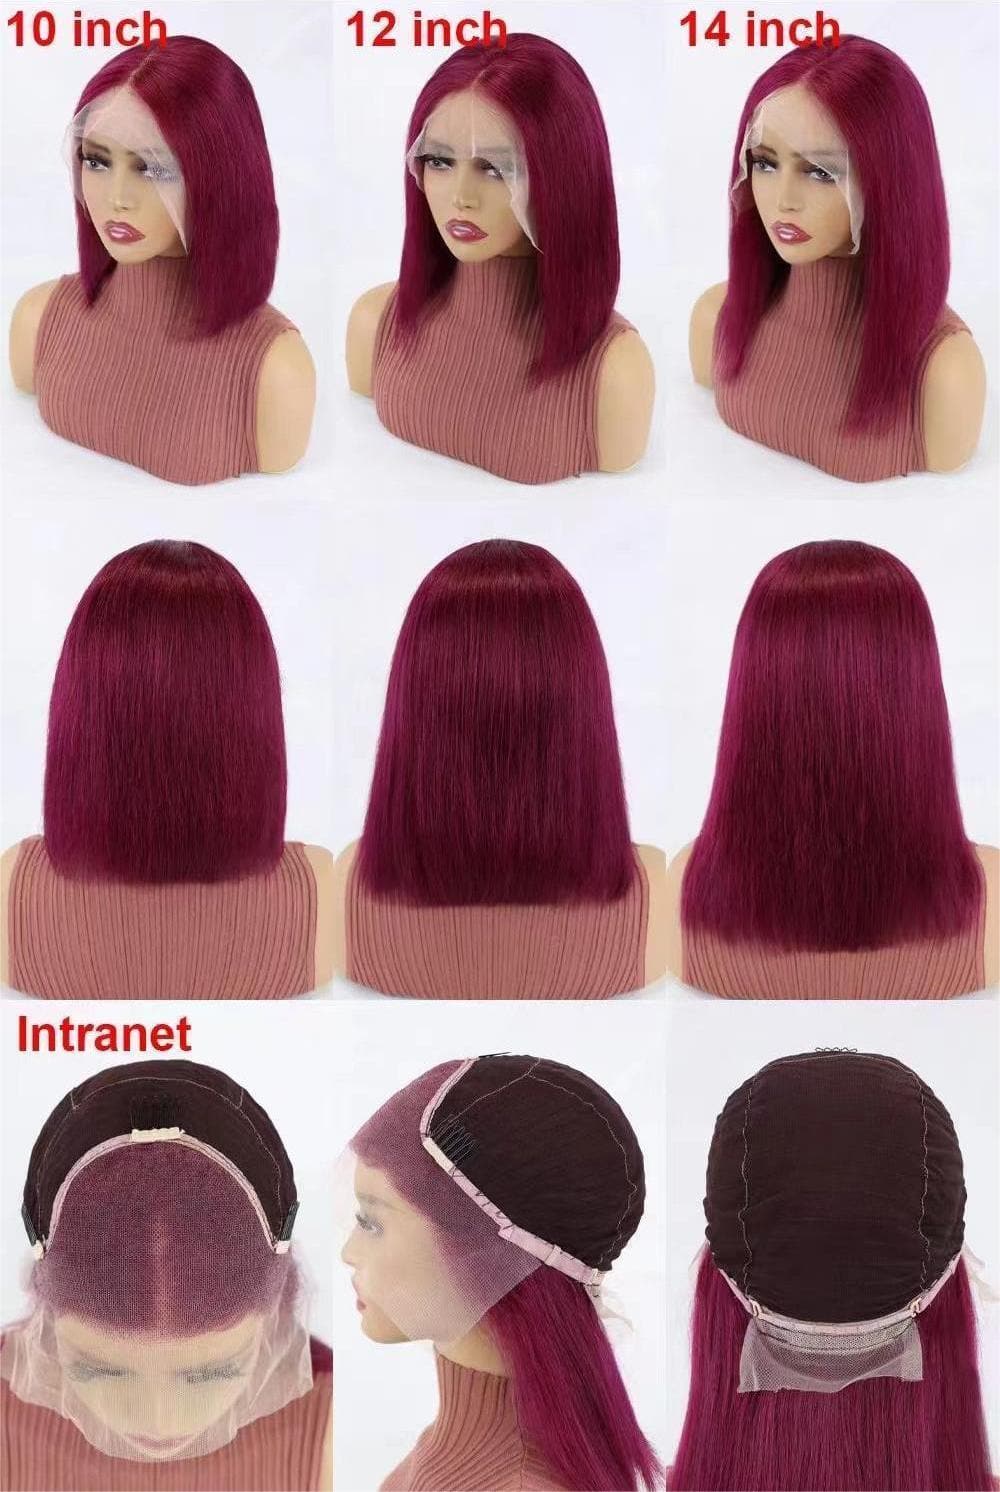 Short Bob Wigs Human Hair 13x4 Lace Front Straight Middle Parted Hairstyles Burgundy E-LITCHI Hair